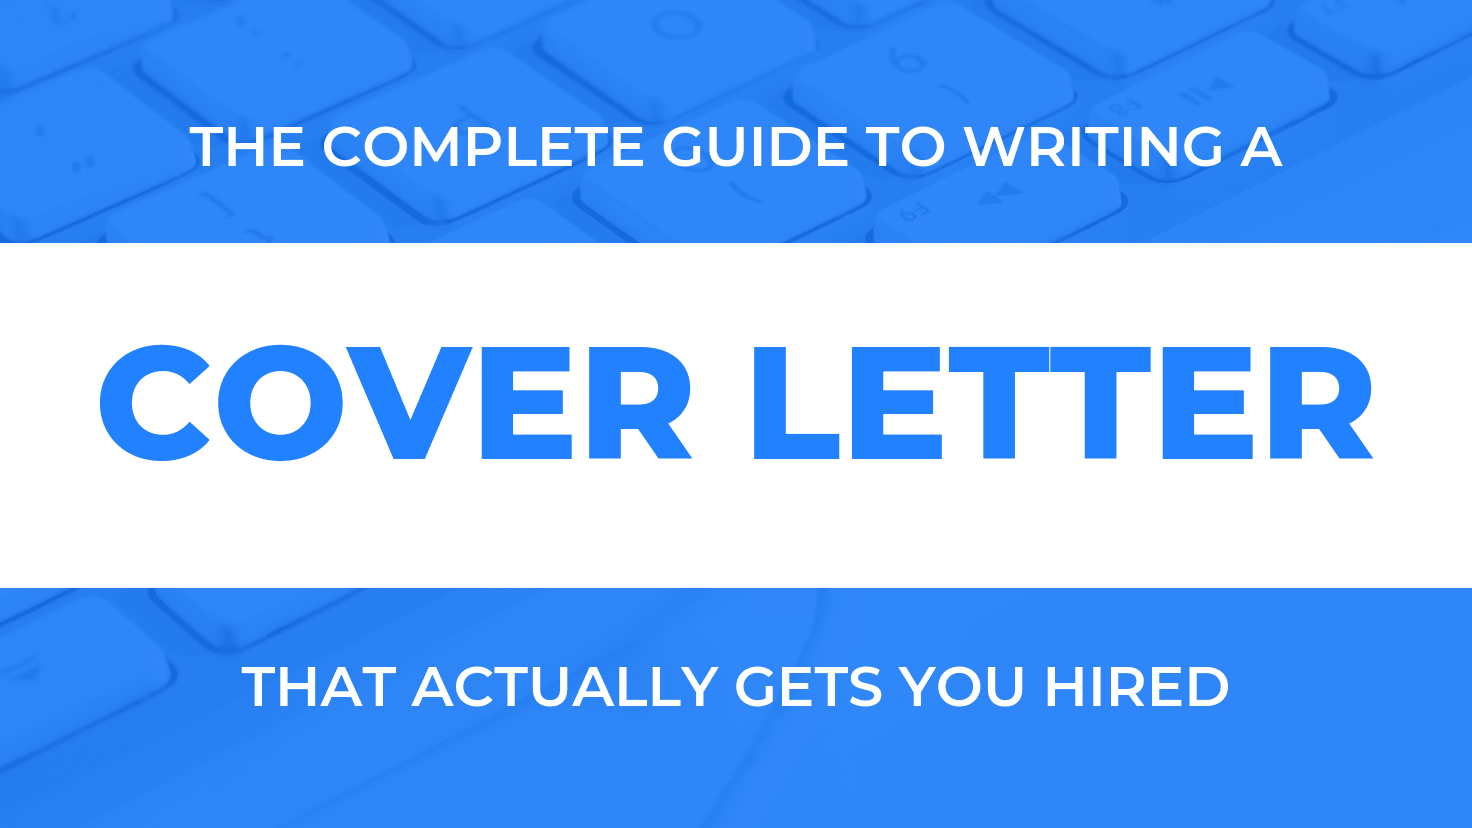 Margins For A Cover Letter from cultivatedculture.com